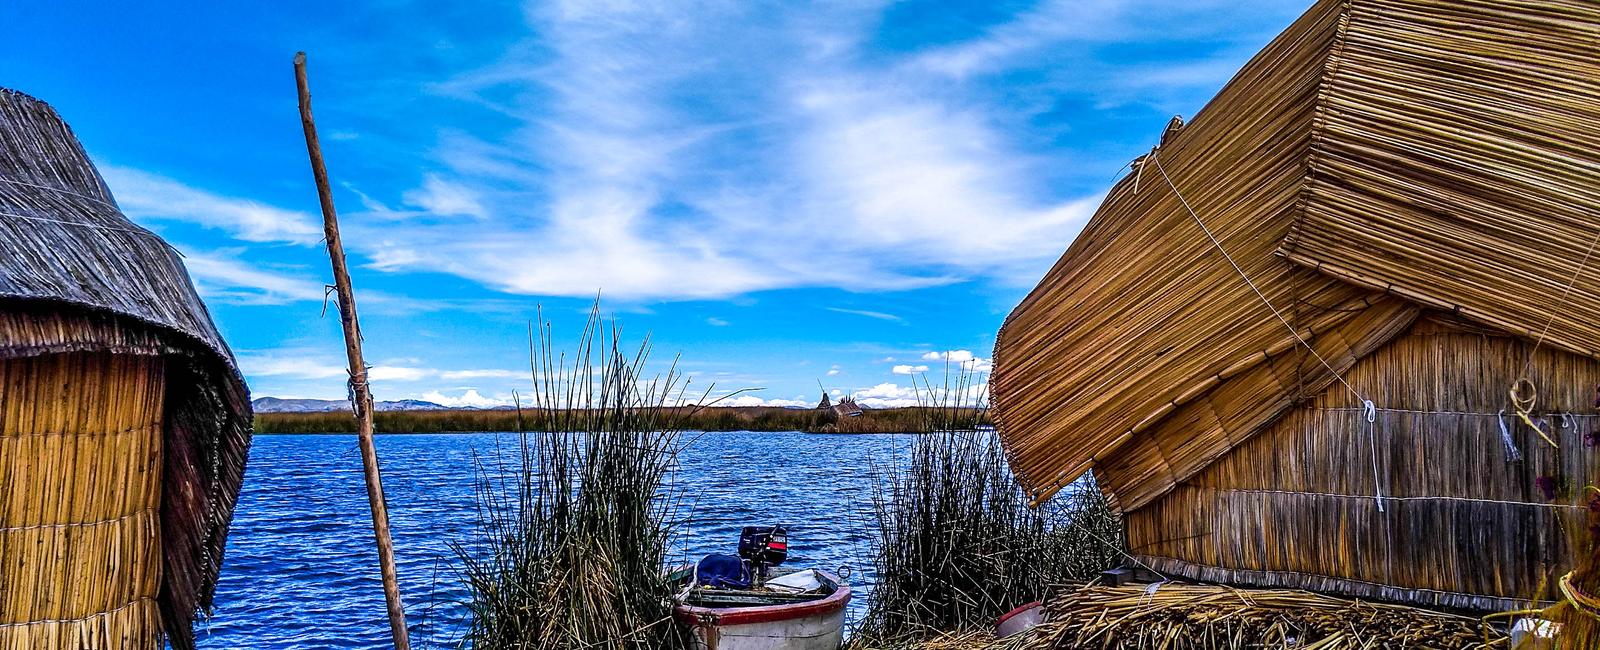 In peru there are floating islands found in lake titicaca these islands were built on stacks of reeds and designed to easily be moved away from danger